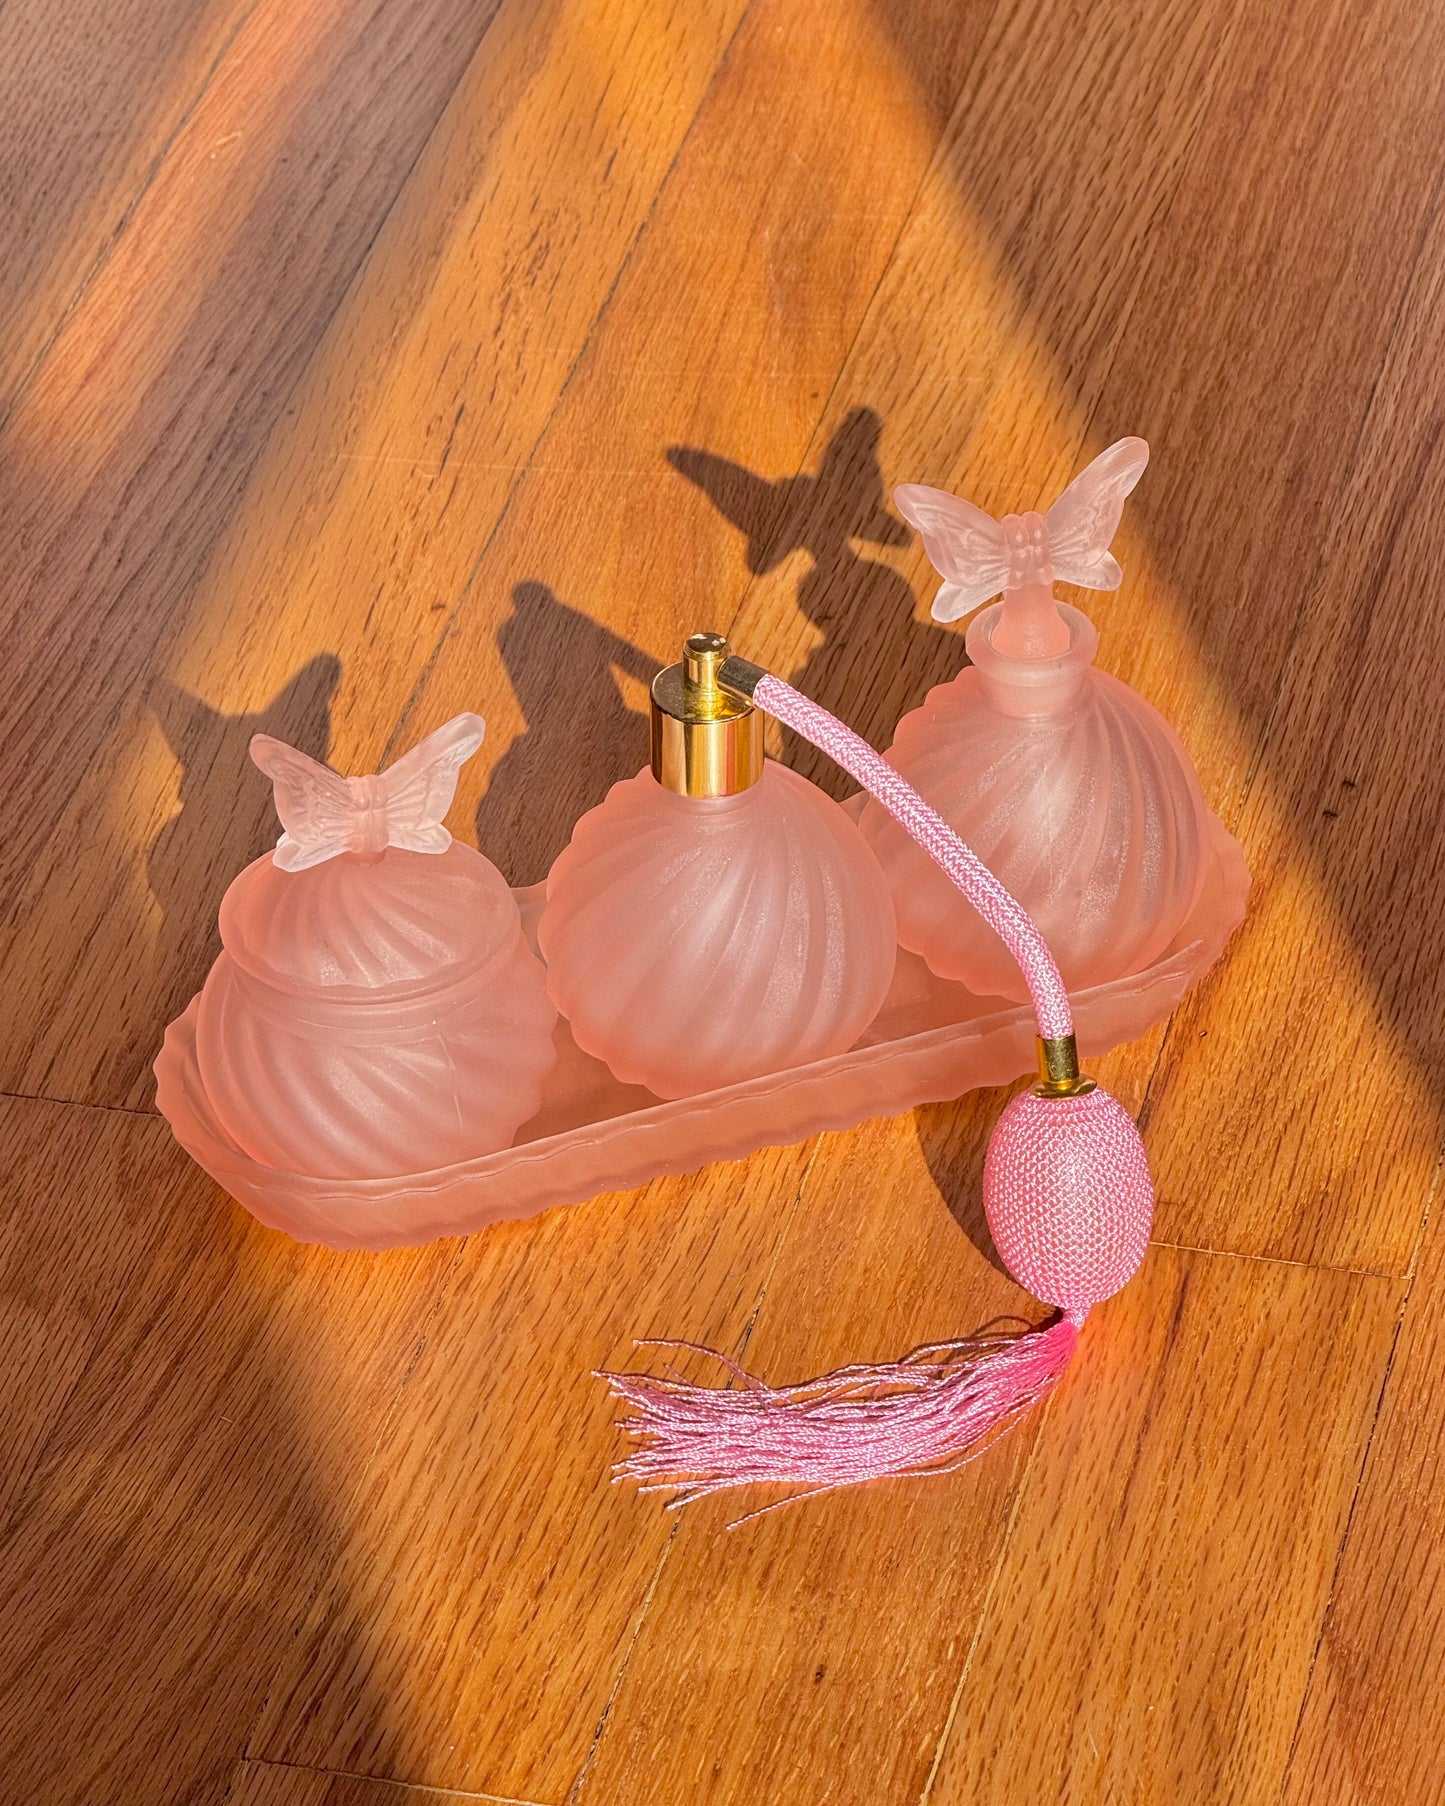 Vintage Pink Butterfly Perfume Set